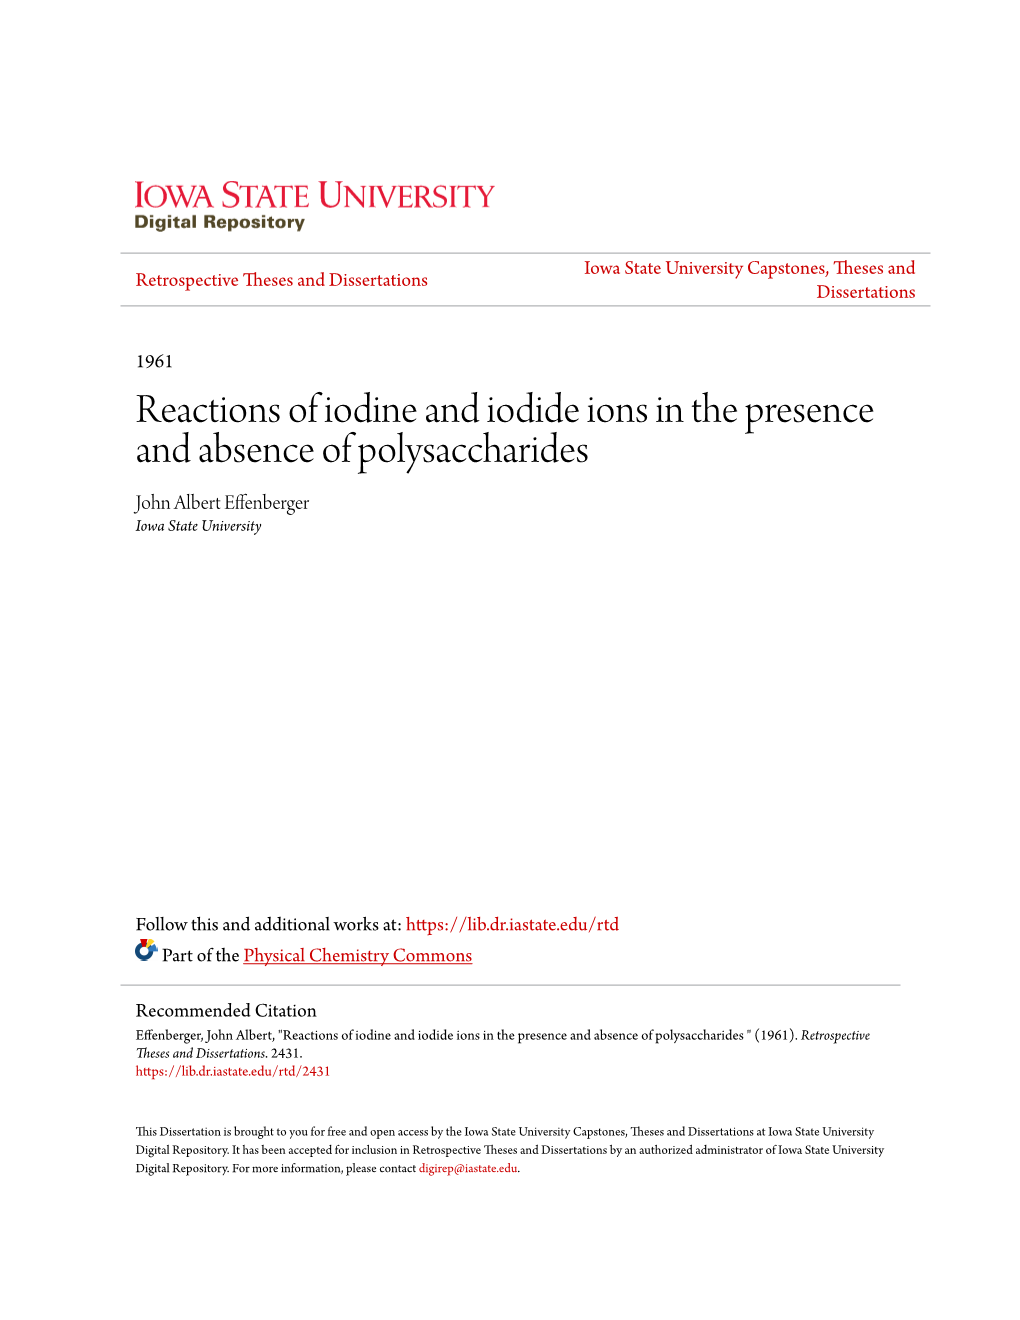 Reactions of Iodine and Iodide Ions in the Presence and Absence of Polysaccharides John Albert Effenberger Iowa State University